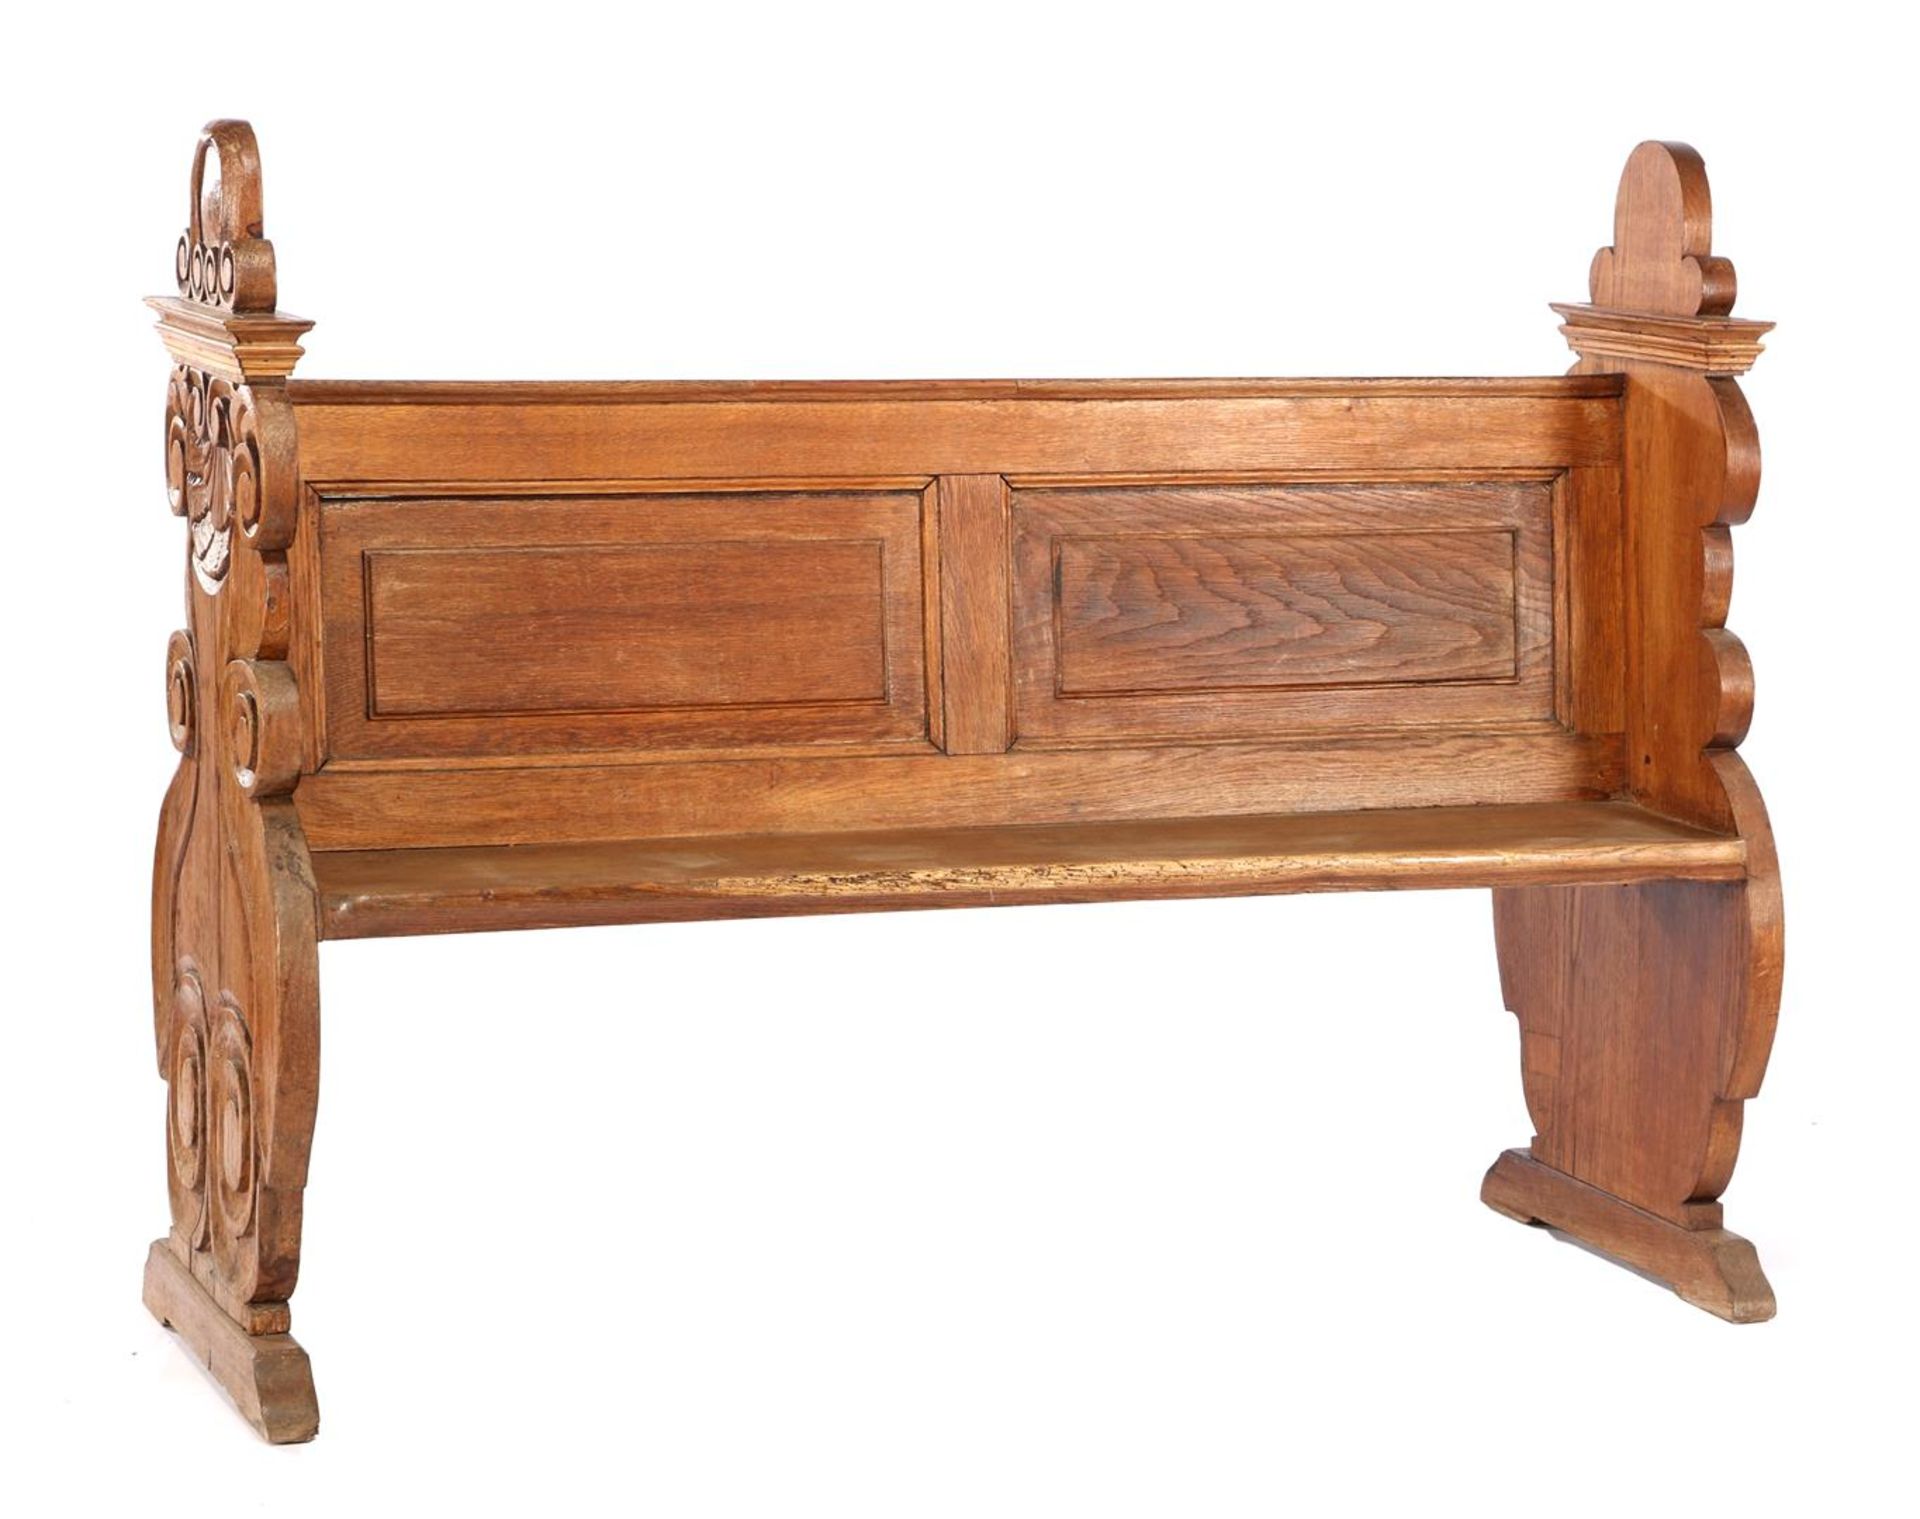 Solid oak pew with burnt sides, 111 cm high, 147 cm wide and 53 cm deep